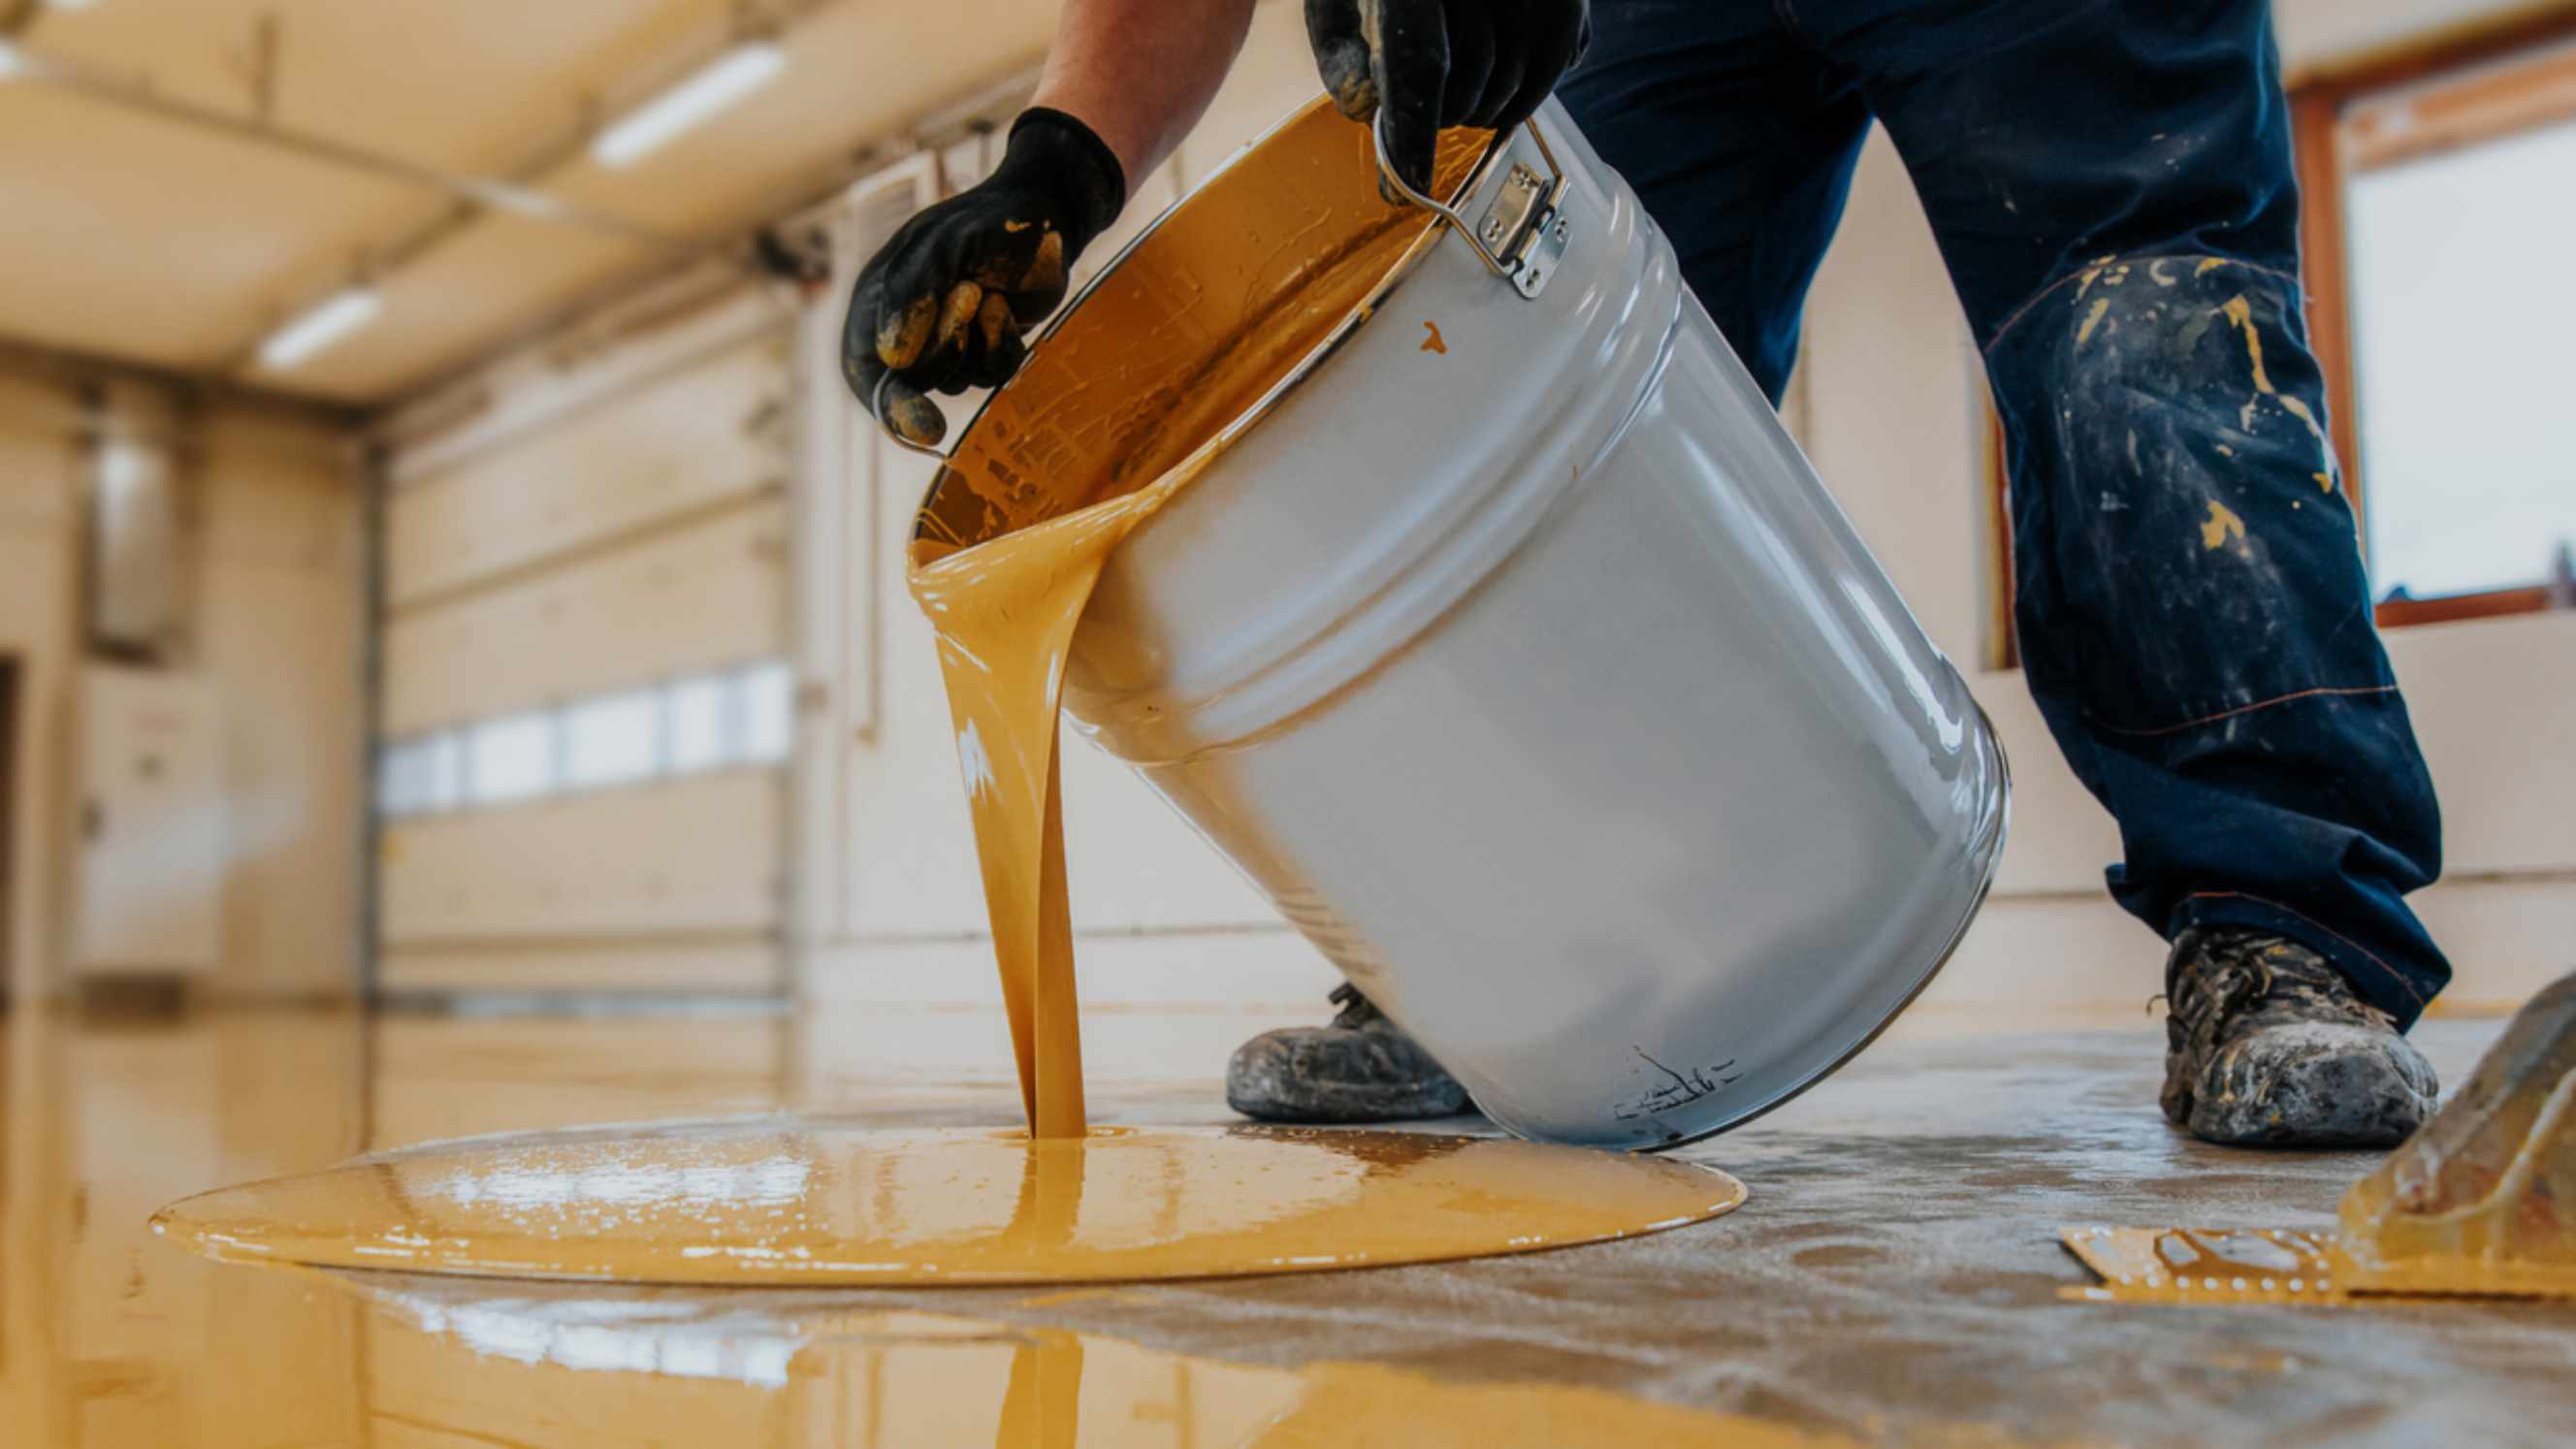 Polyester resin vs epoxy resin - A worker applying a yellow epoxy resin bucket on floor for the final coat